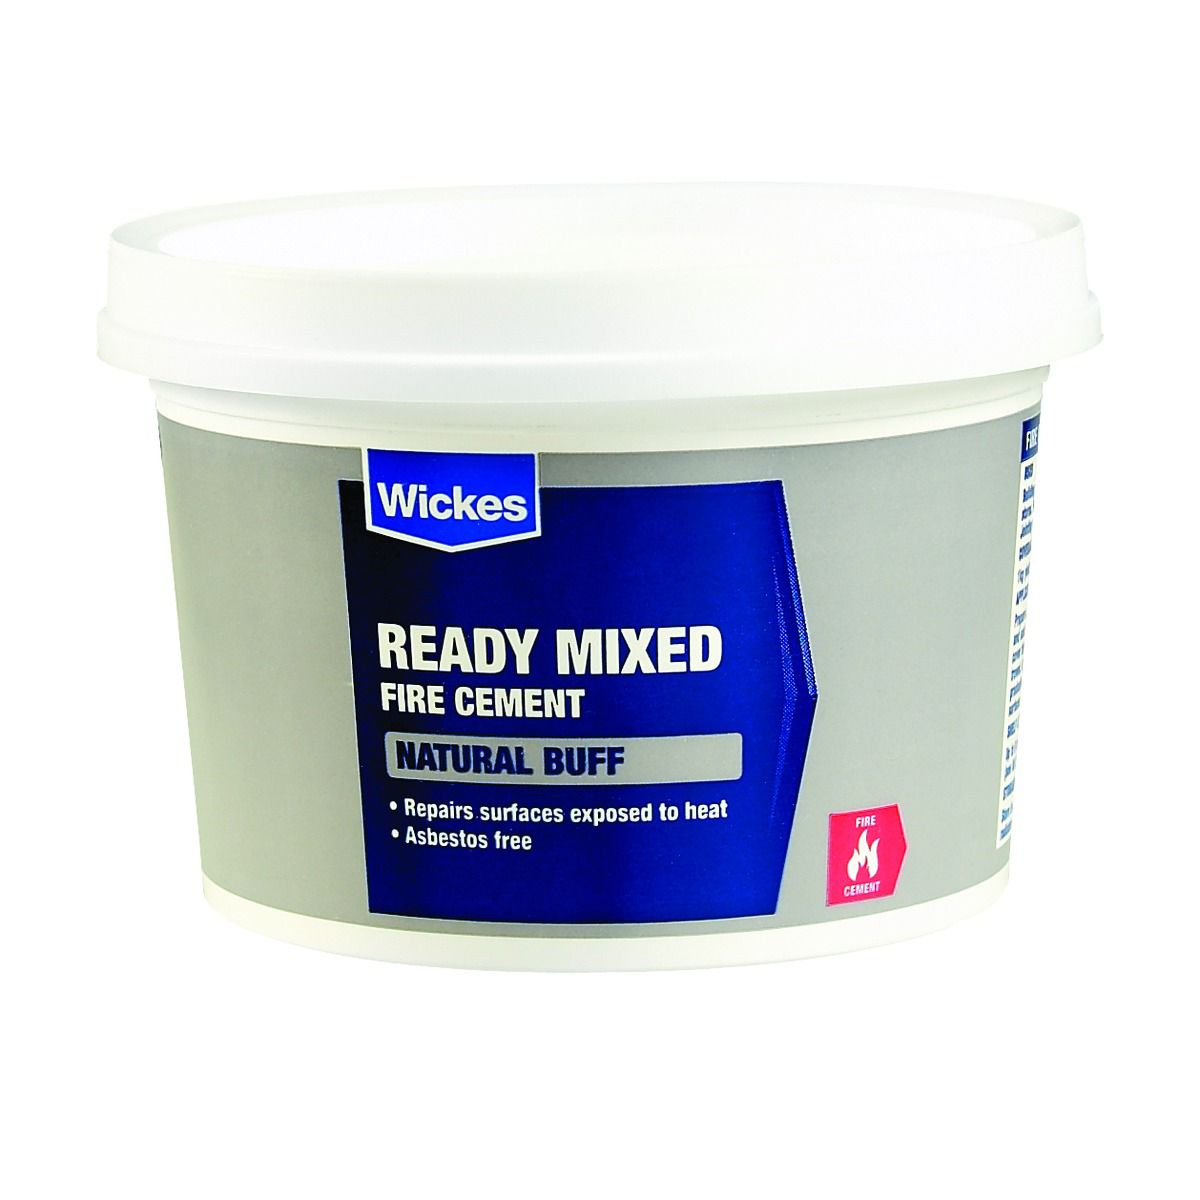 Image of Wickes Ready Mixed Fire Cement - 1kg